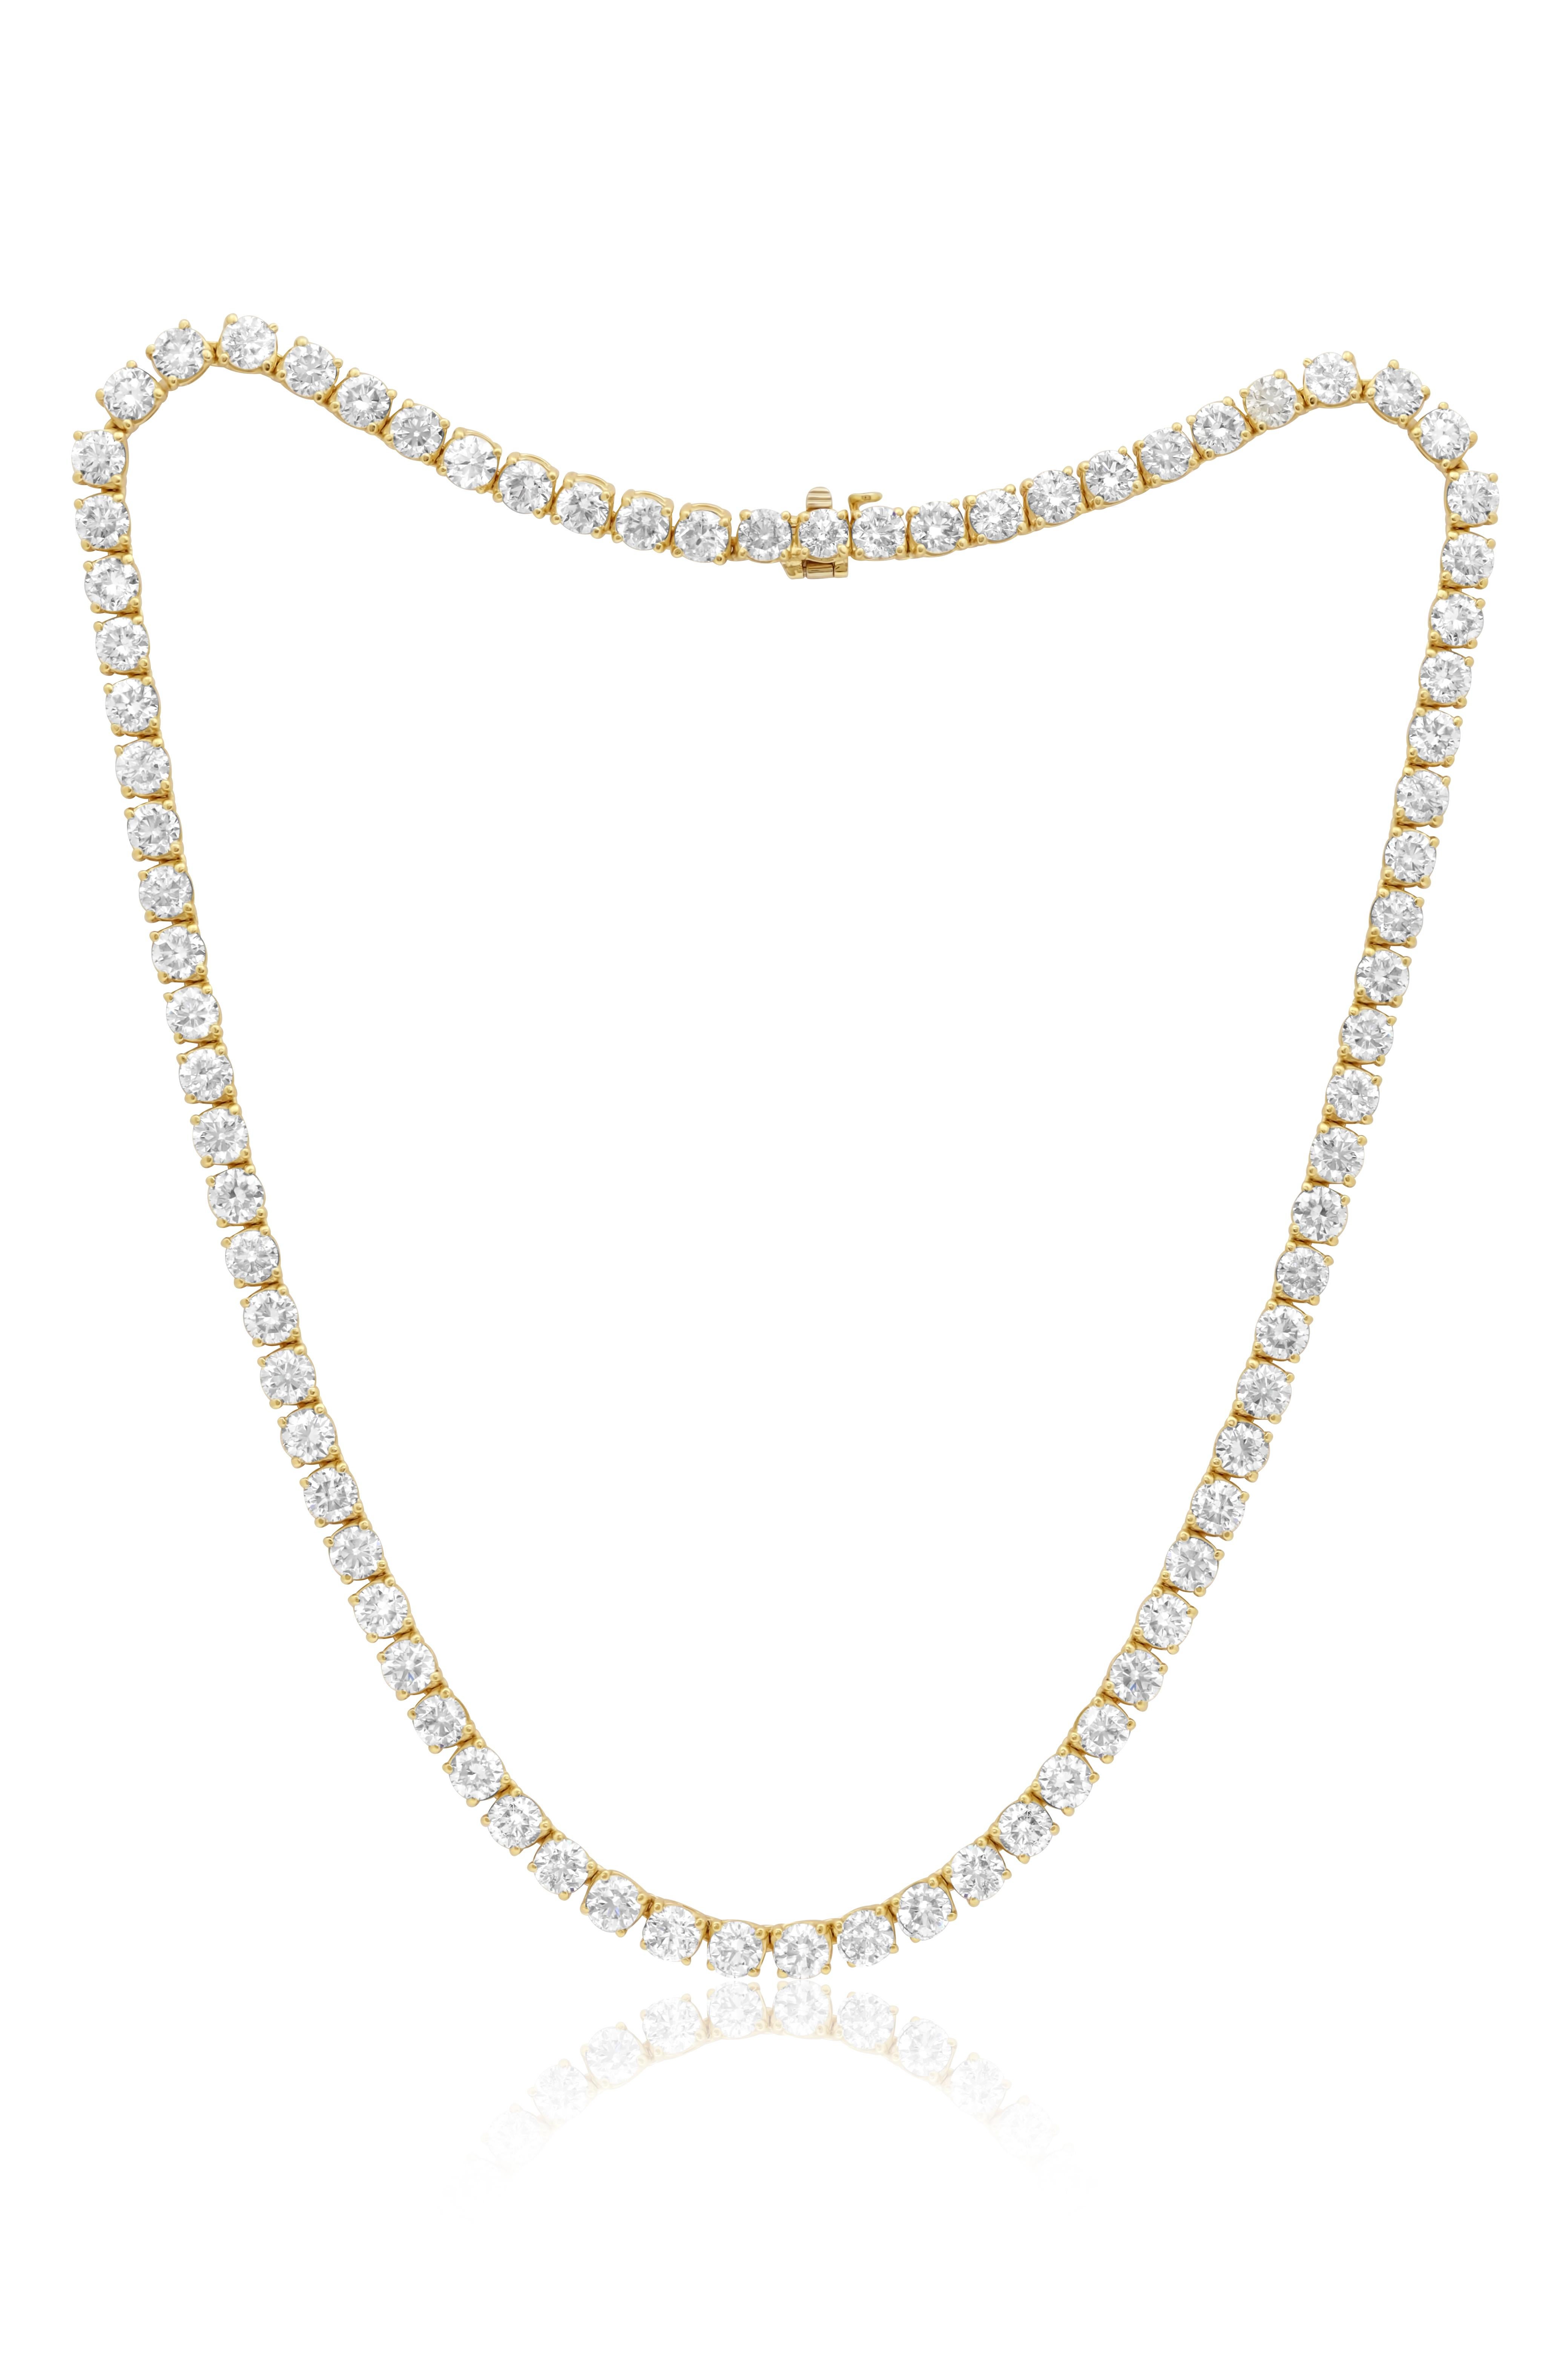 Modern Diana M. Custom 25.00 cts Round 4 Prong Diamond 18K Yellow Gold Tennis Necklace  For Sale